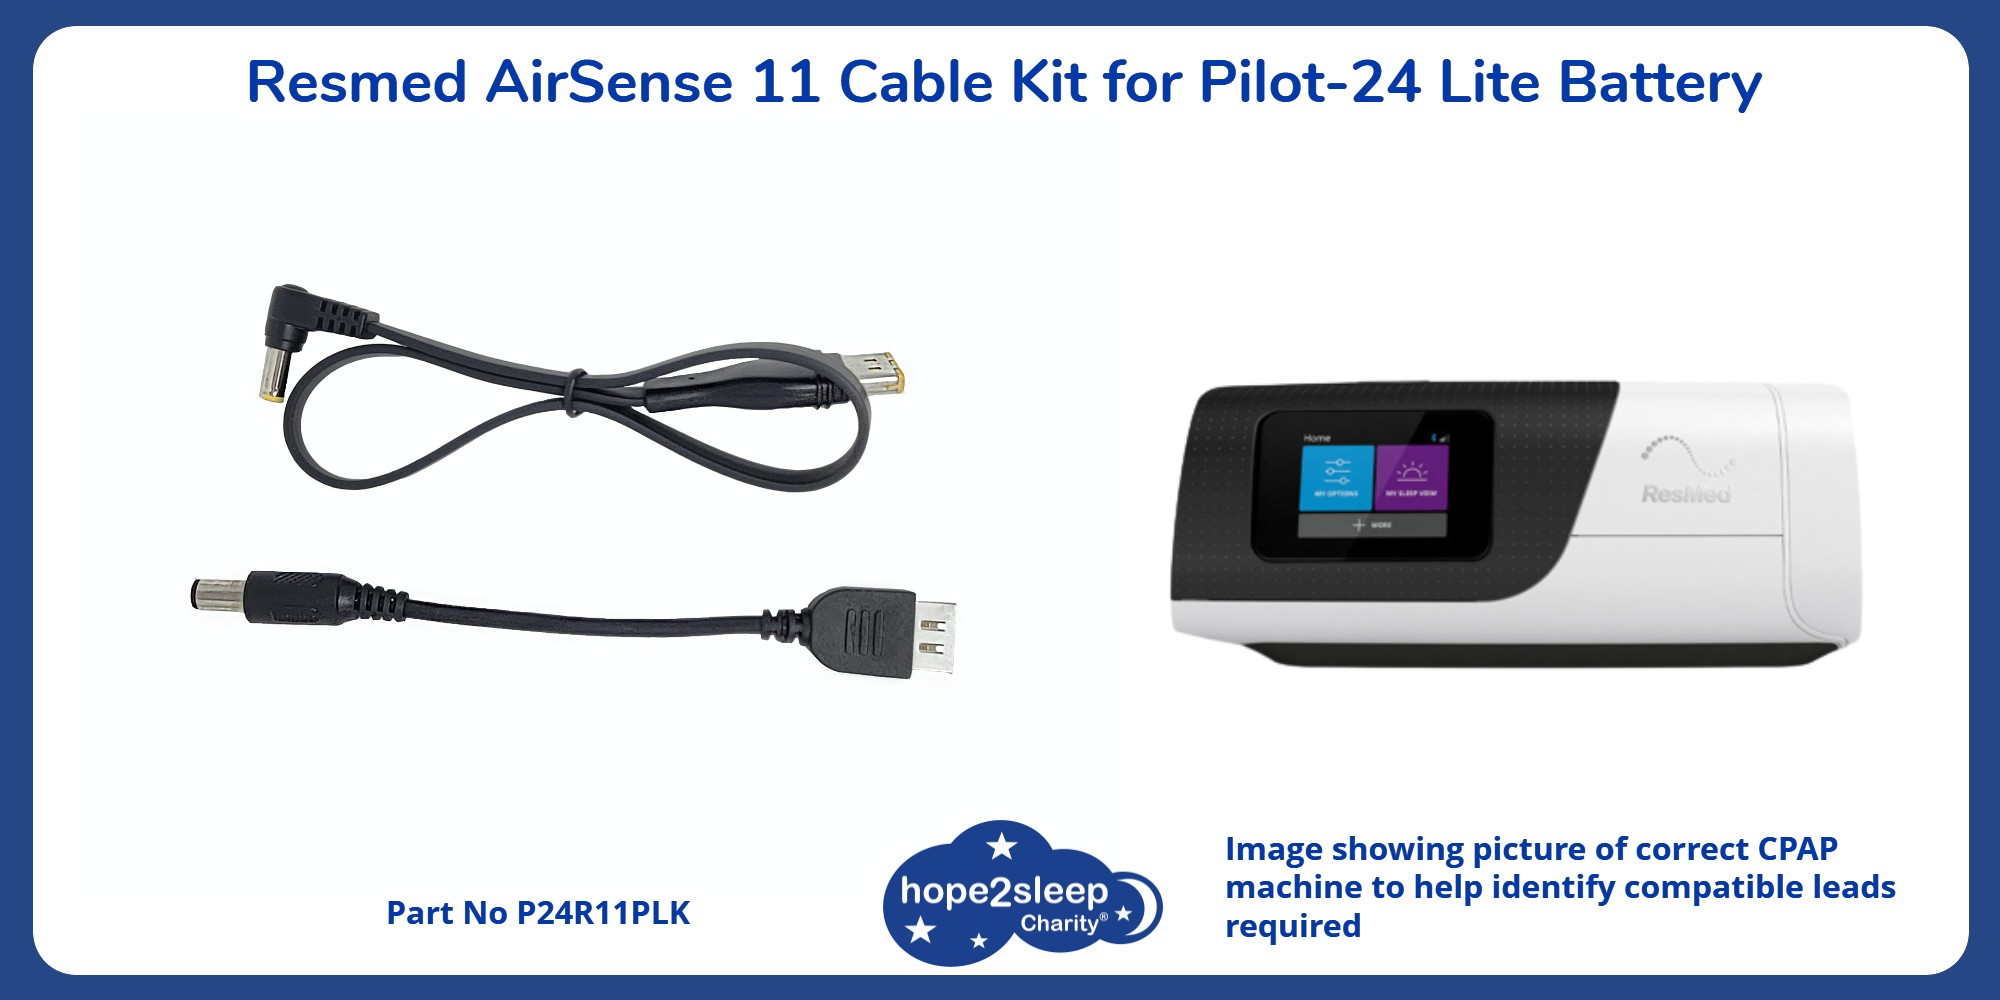 Airsense11 Cable Kit for Pilot-24 Battery